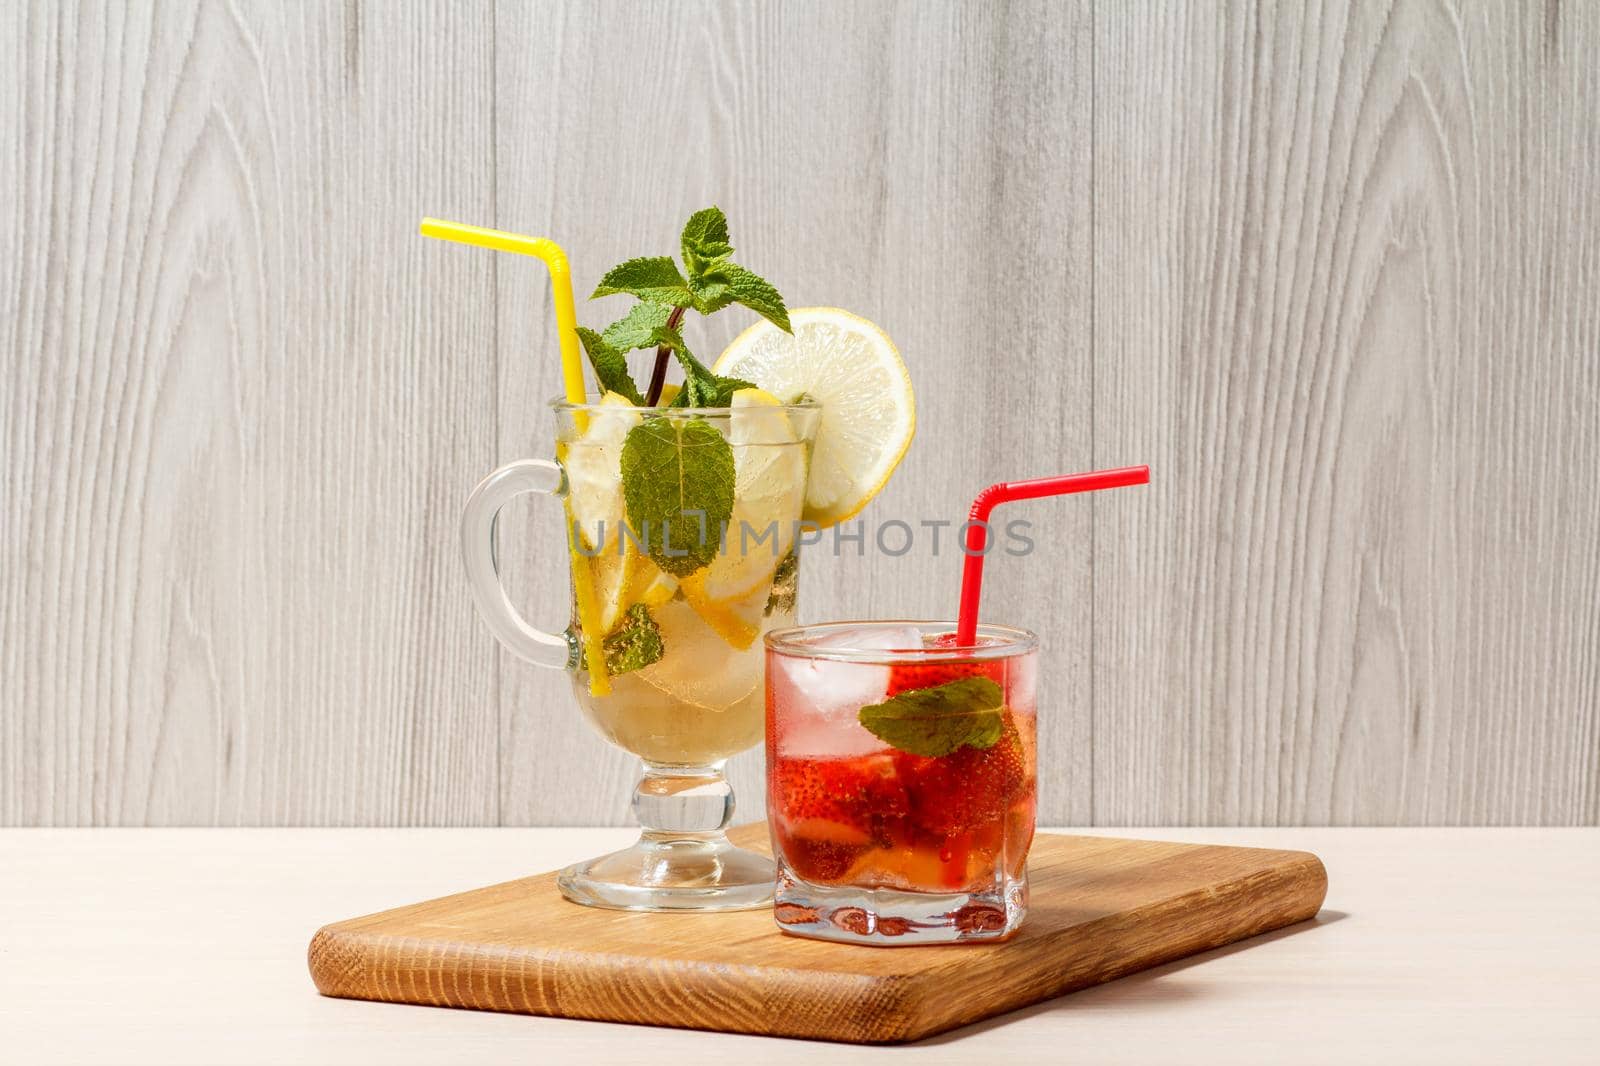 Cold refreshing summer lemonade mojito with lemon slices and mint in a tall glass and strawberry lemonade with mint in a short one on a wooden cutting board